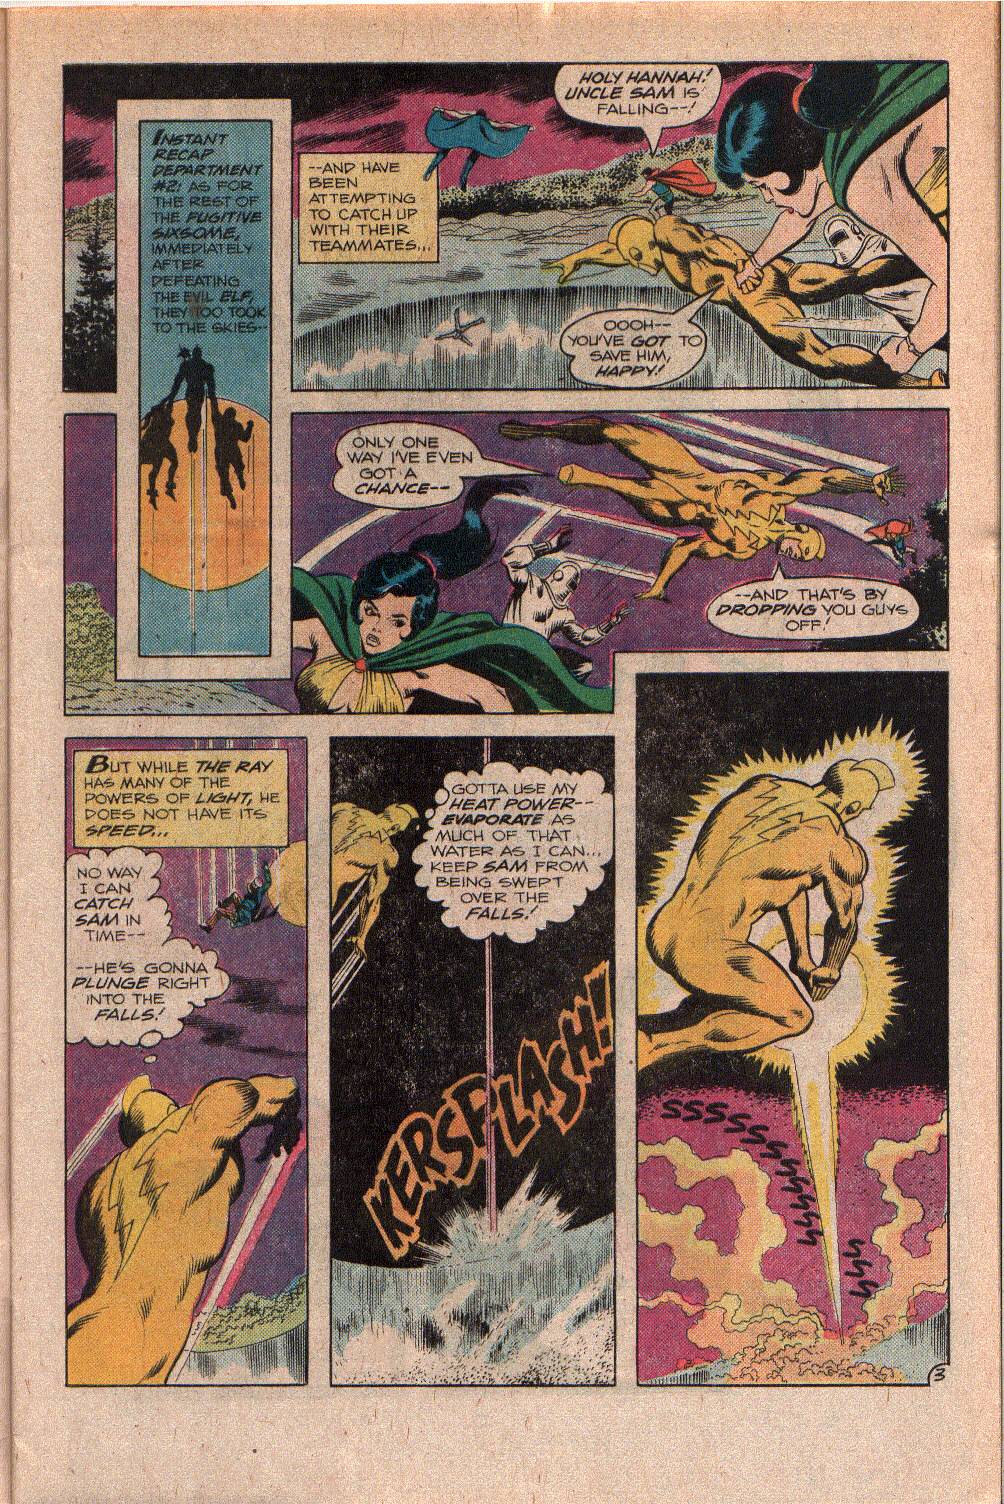 Freedom Fighters (1976) Issue #8 #8 - English 5